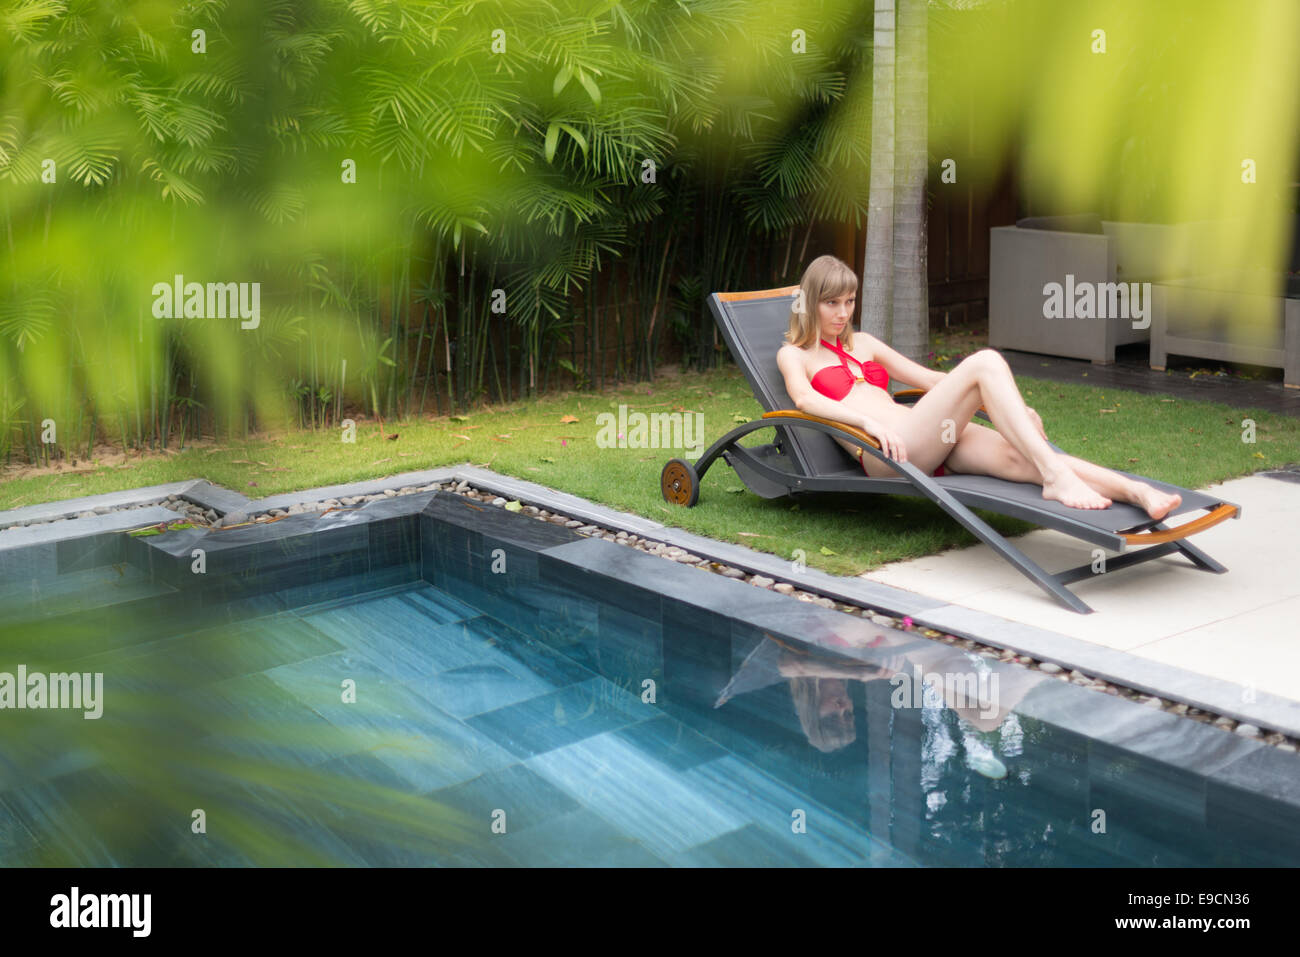 Young woman in red swimsuit relaxing on chaise longue near pool. Blurred palm tree leaves in foreground. Stock Photo